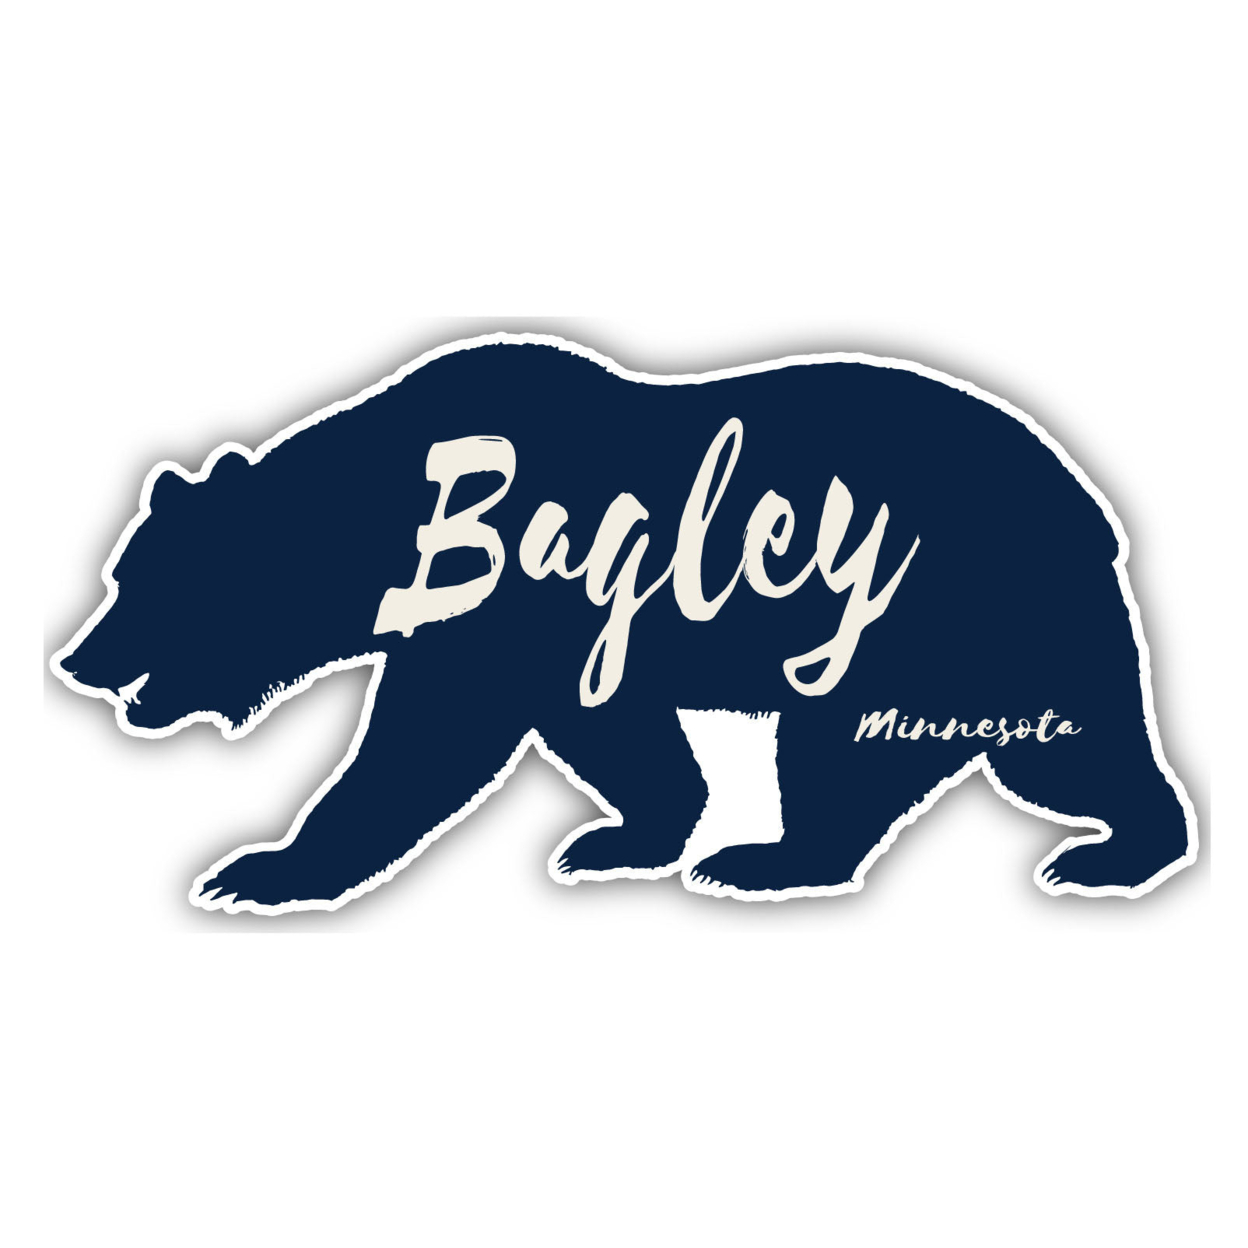 Bagley Minnesota Souvenir Decorative Stickers (Choose Theme And Size) - 4-Pack, 8-Inch, Bear